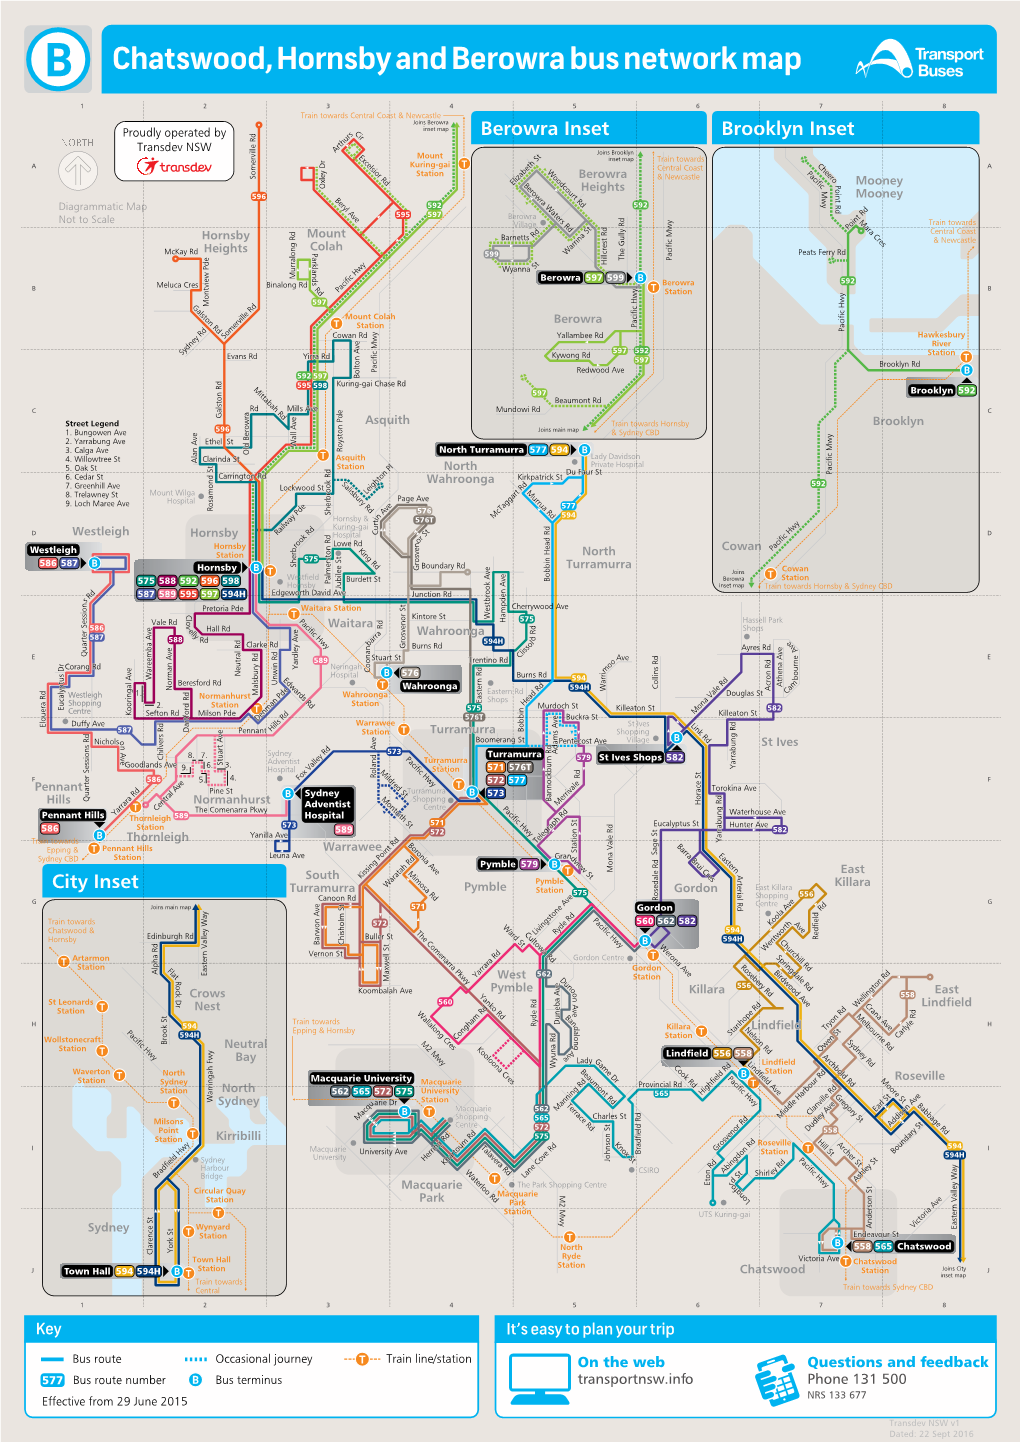 Chatswood, Hornsby and Berowra Bus Network Map